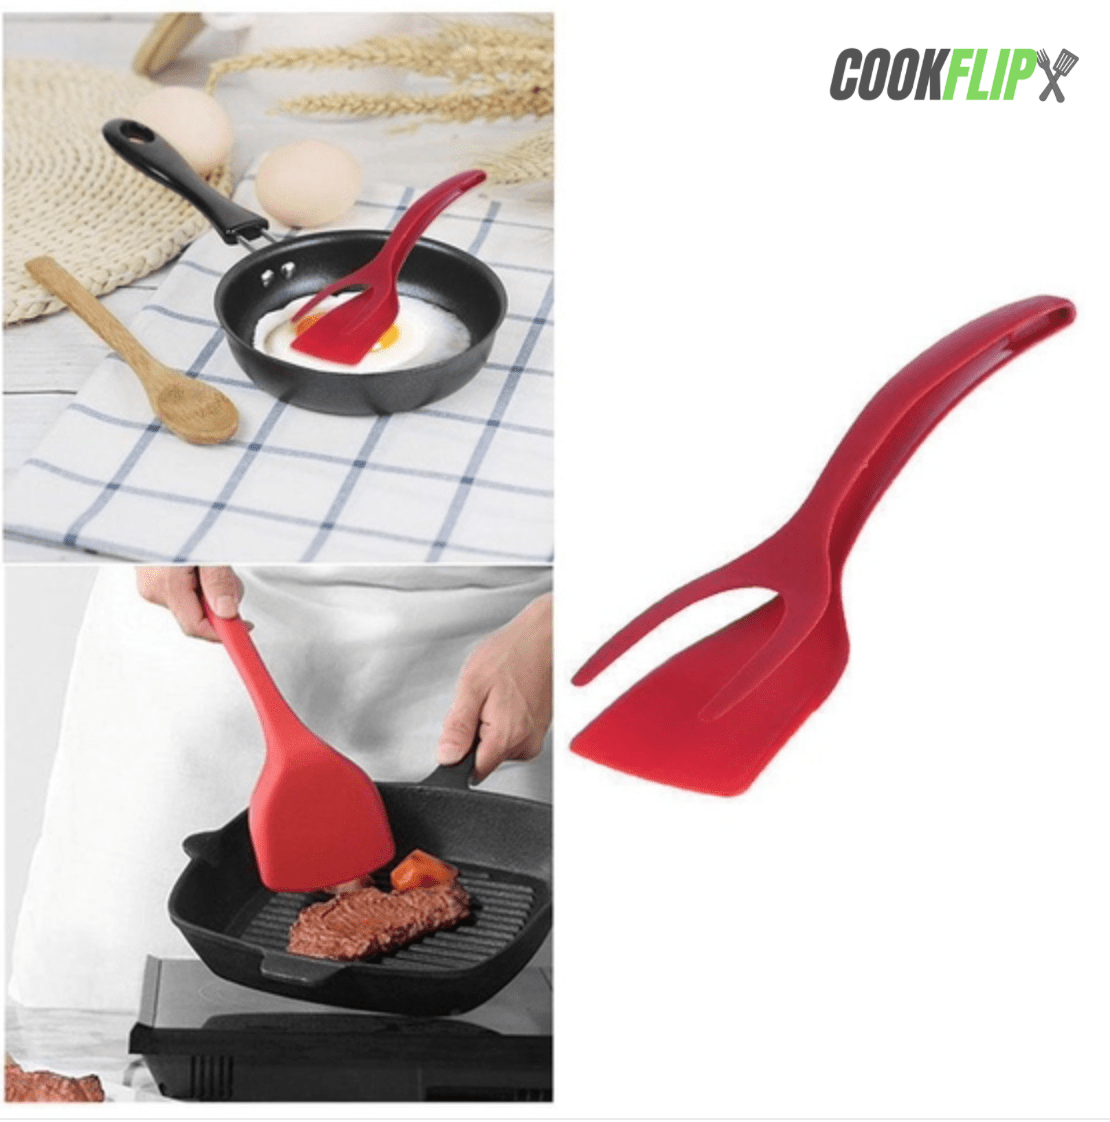 Loopsun Kitchen Accessories Flip Egg 2IN1 Flip Perfect Pancake Making Ease  Cooking Hotel Home Kitchen Tool